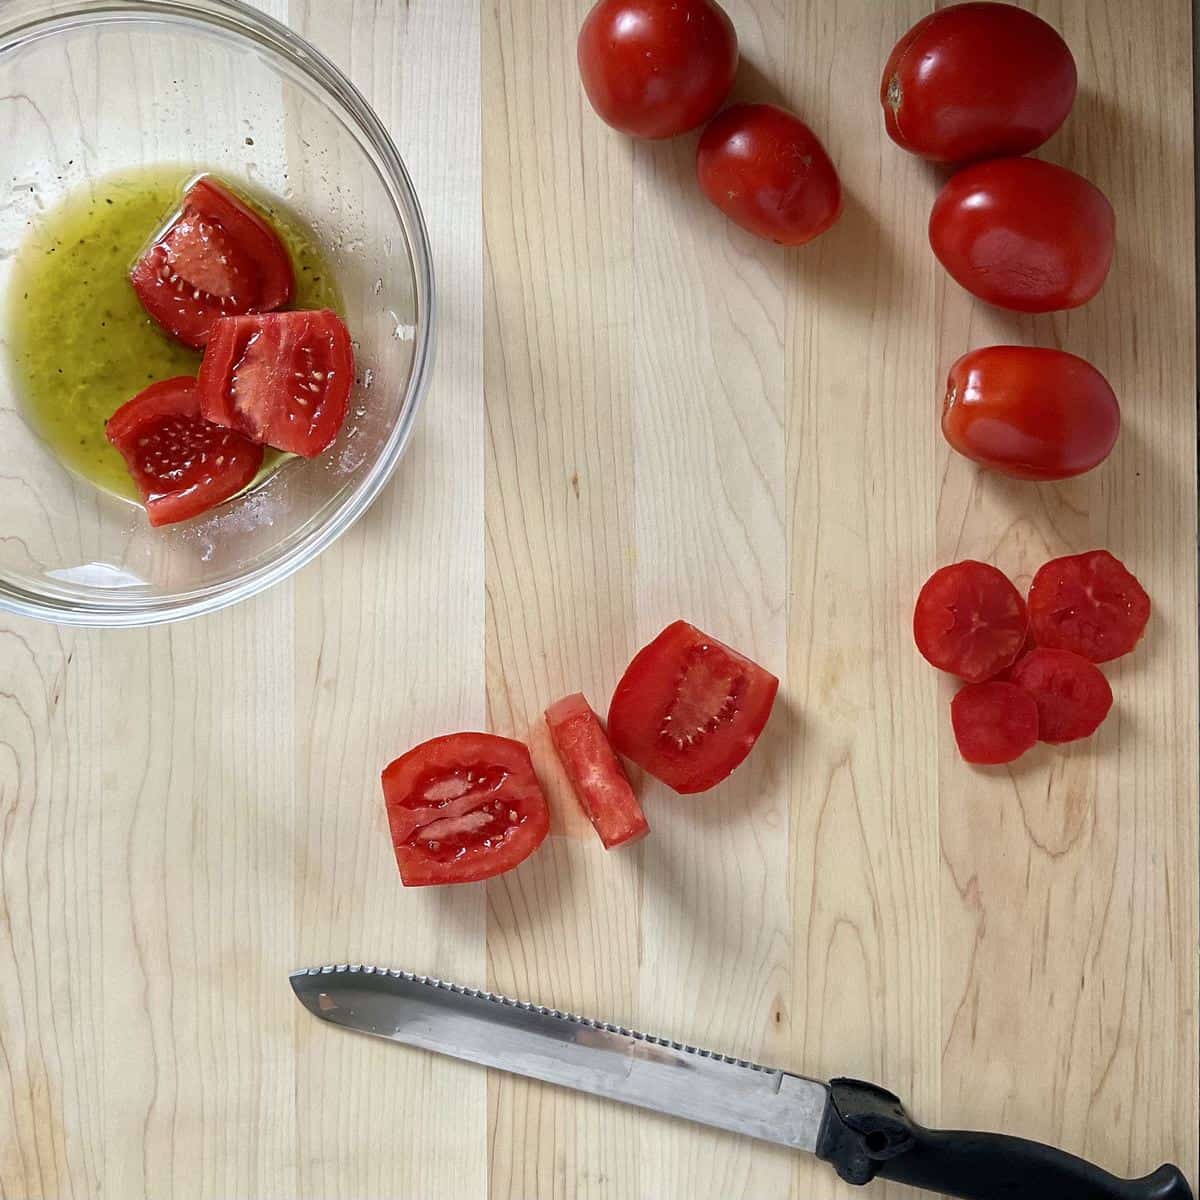 Sliced tomatoes on a wooden board.